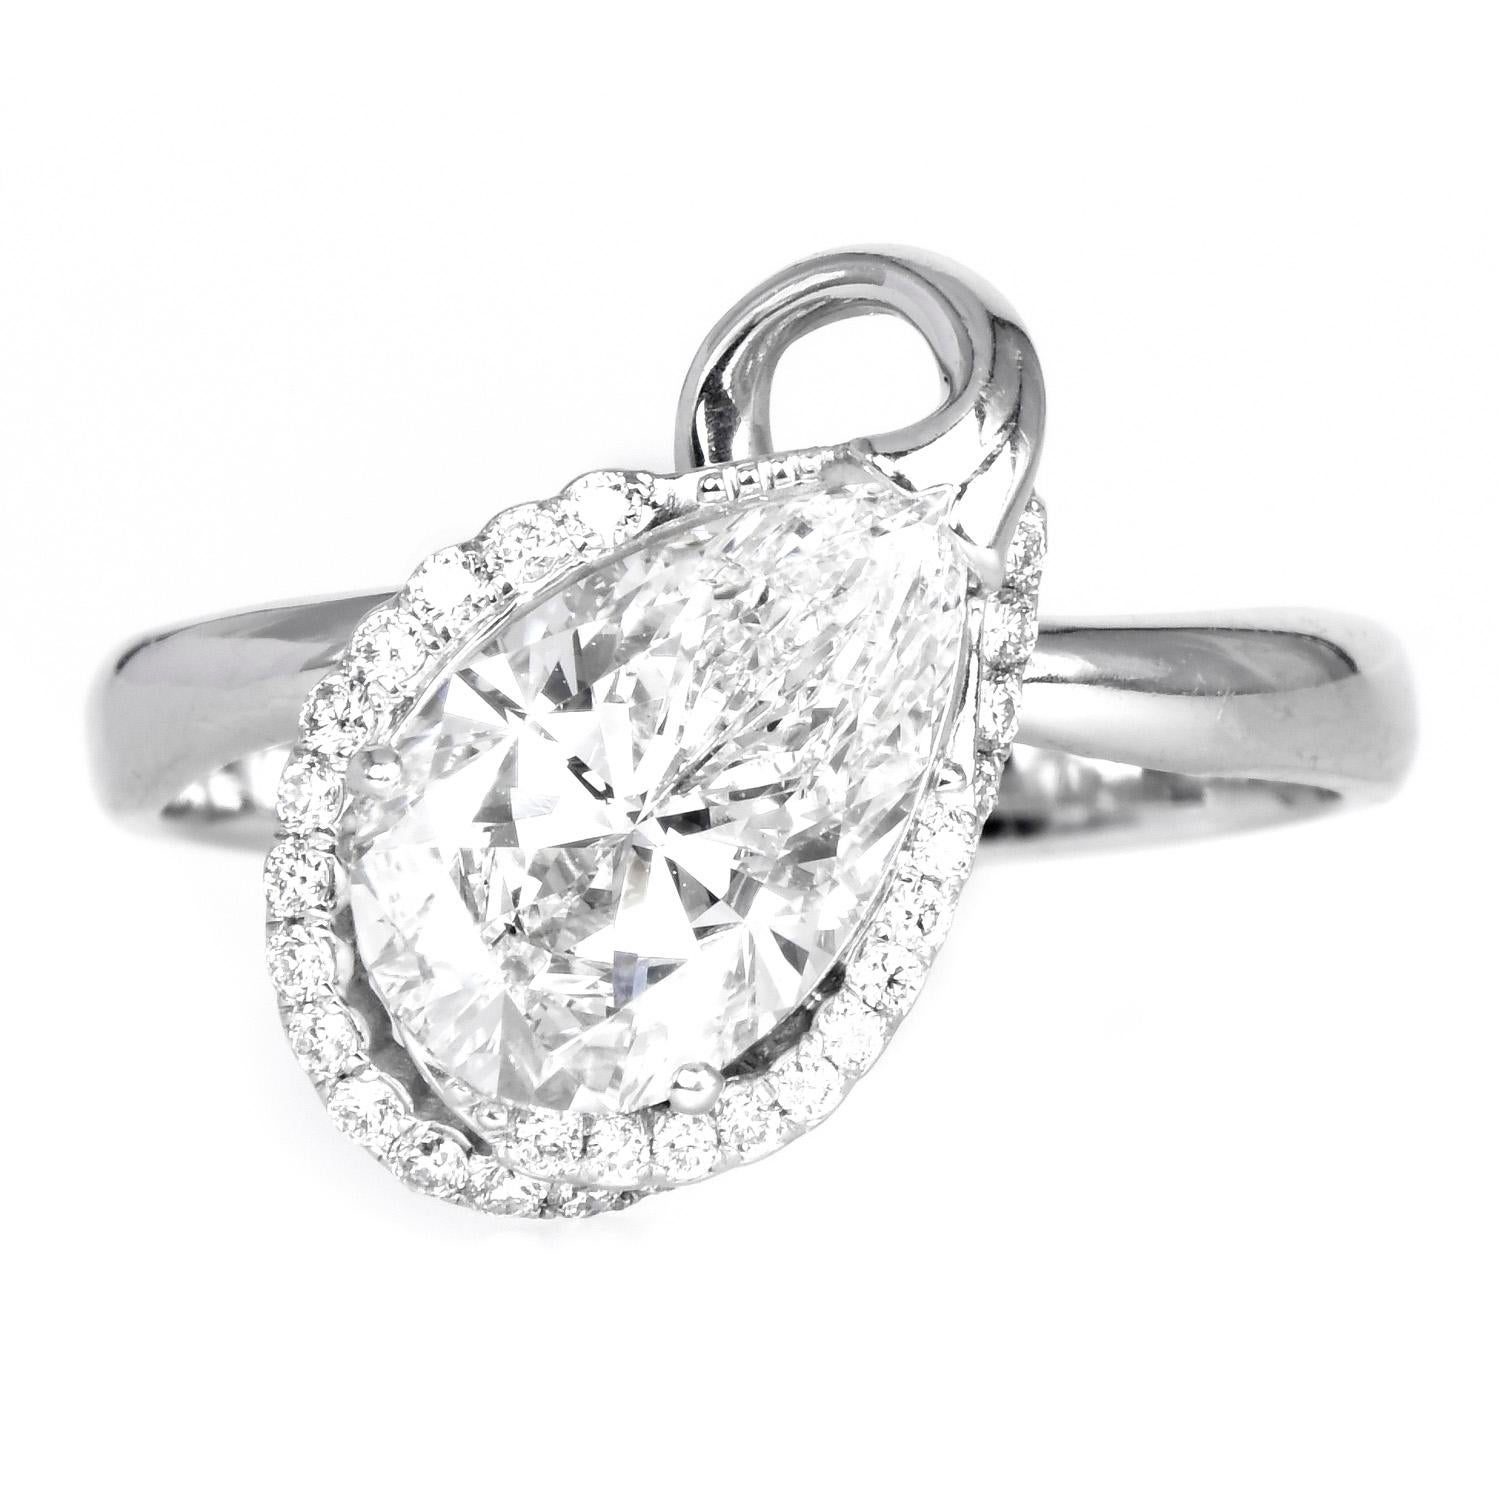 A romantic and unique twist to the pear-shaped engagement rings, inspired by a vine floral design.

this wide GIA-certified Diamond ring is perfect for that special person.

Crafted in solid 14K white gold, the center is adorned by a